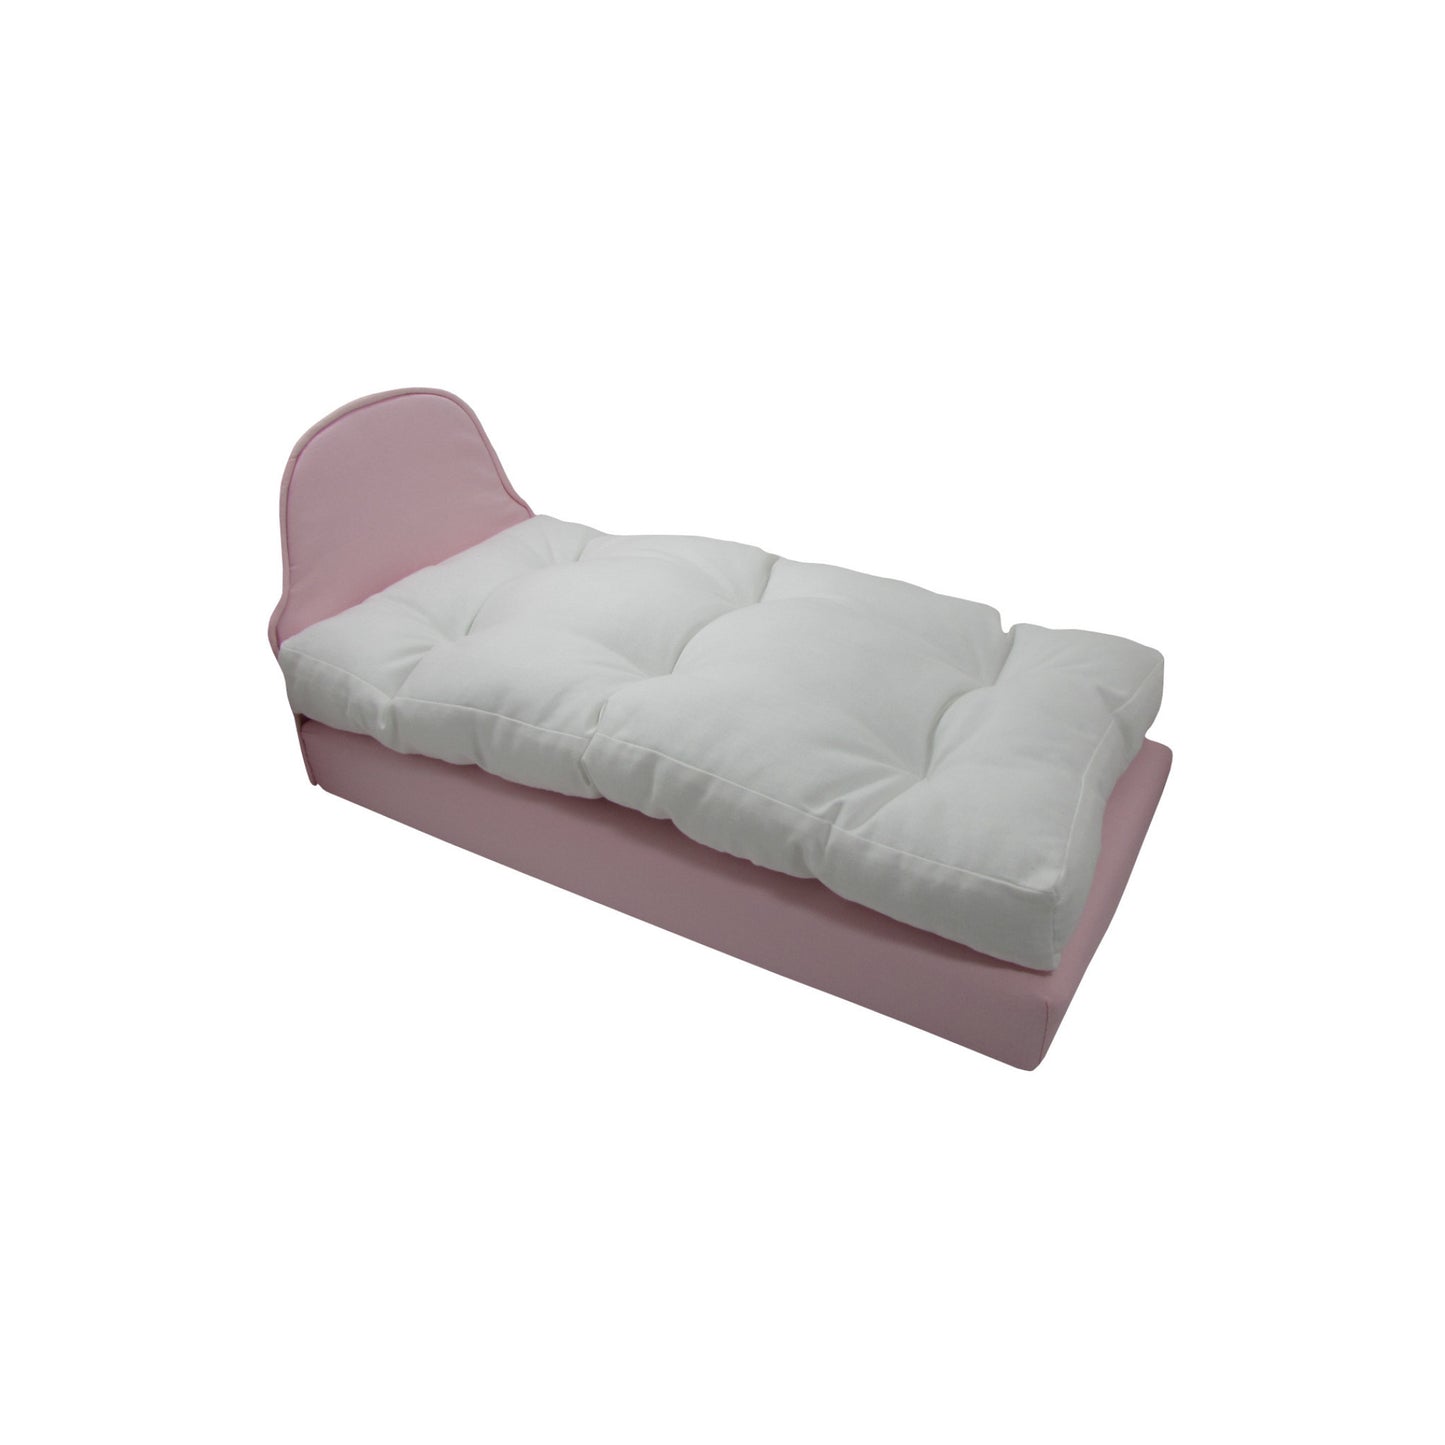 Upholstered Light Pink Doll Bed for 14.5-inch dolls